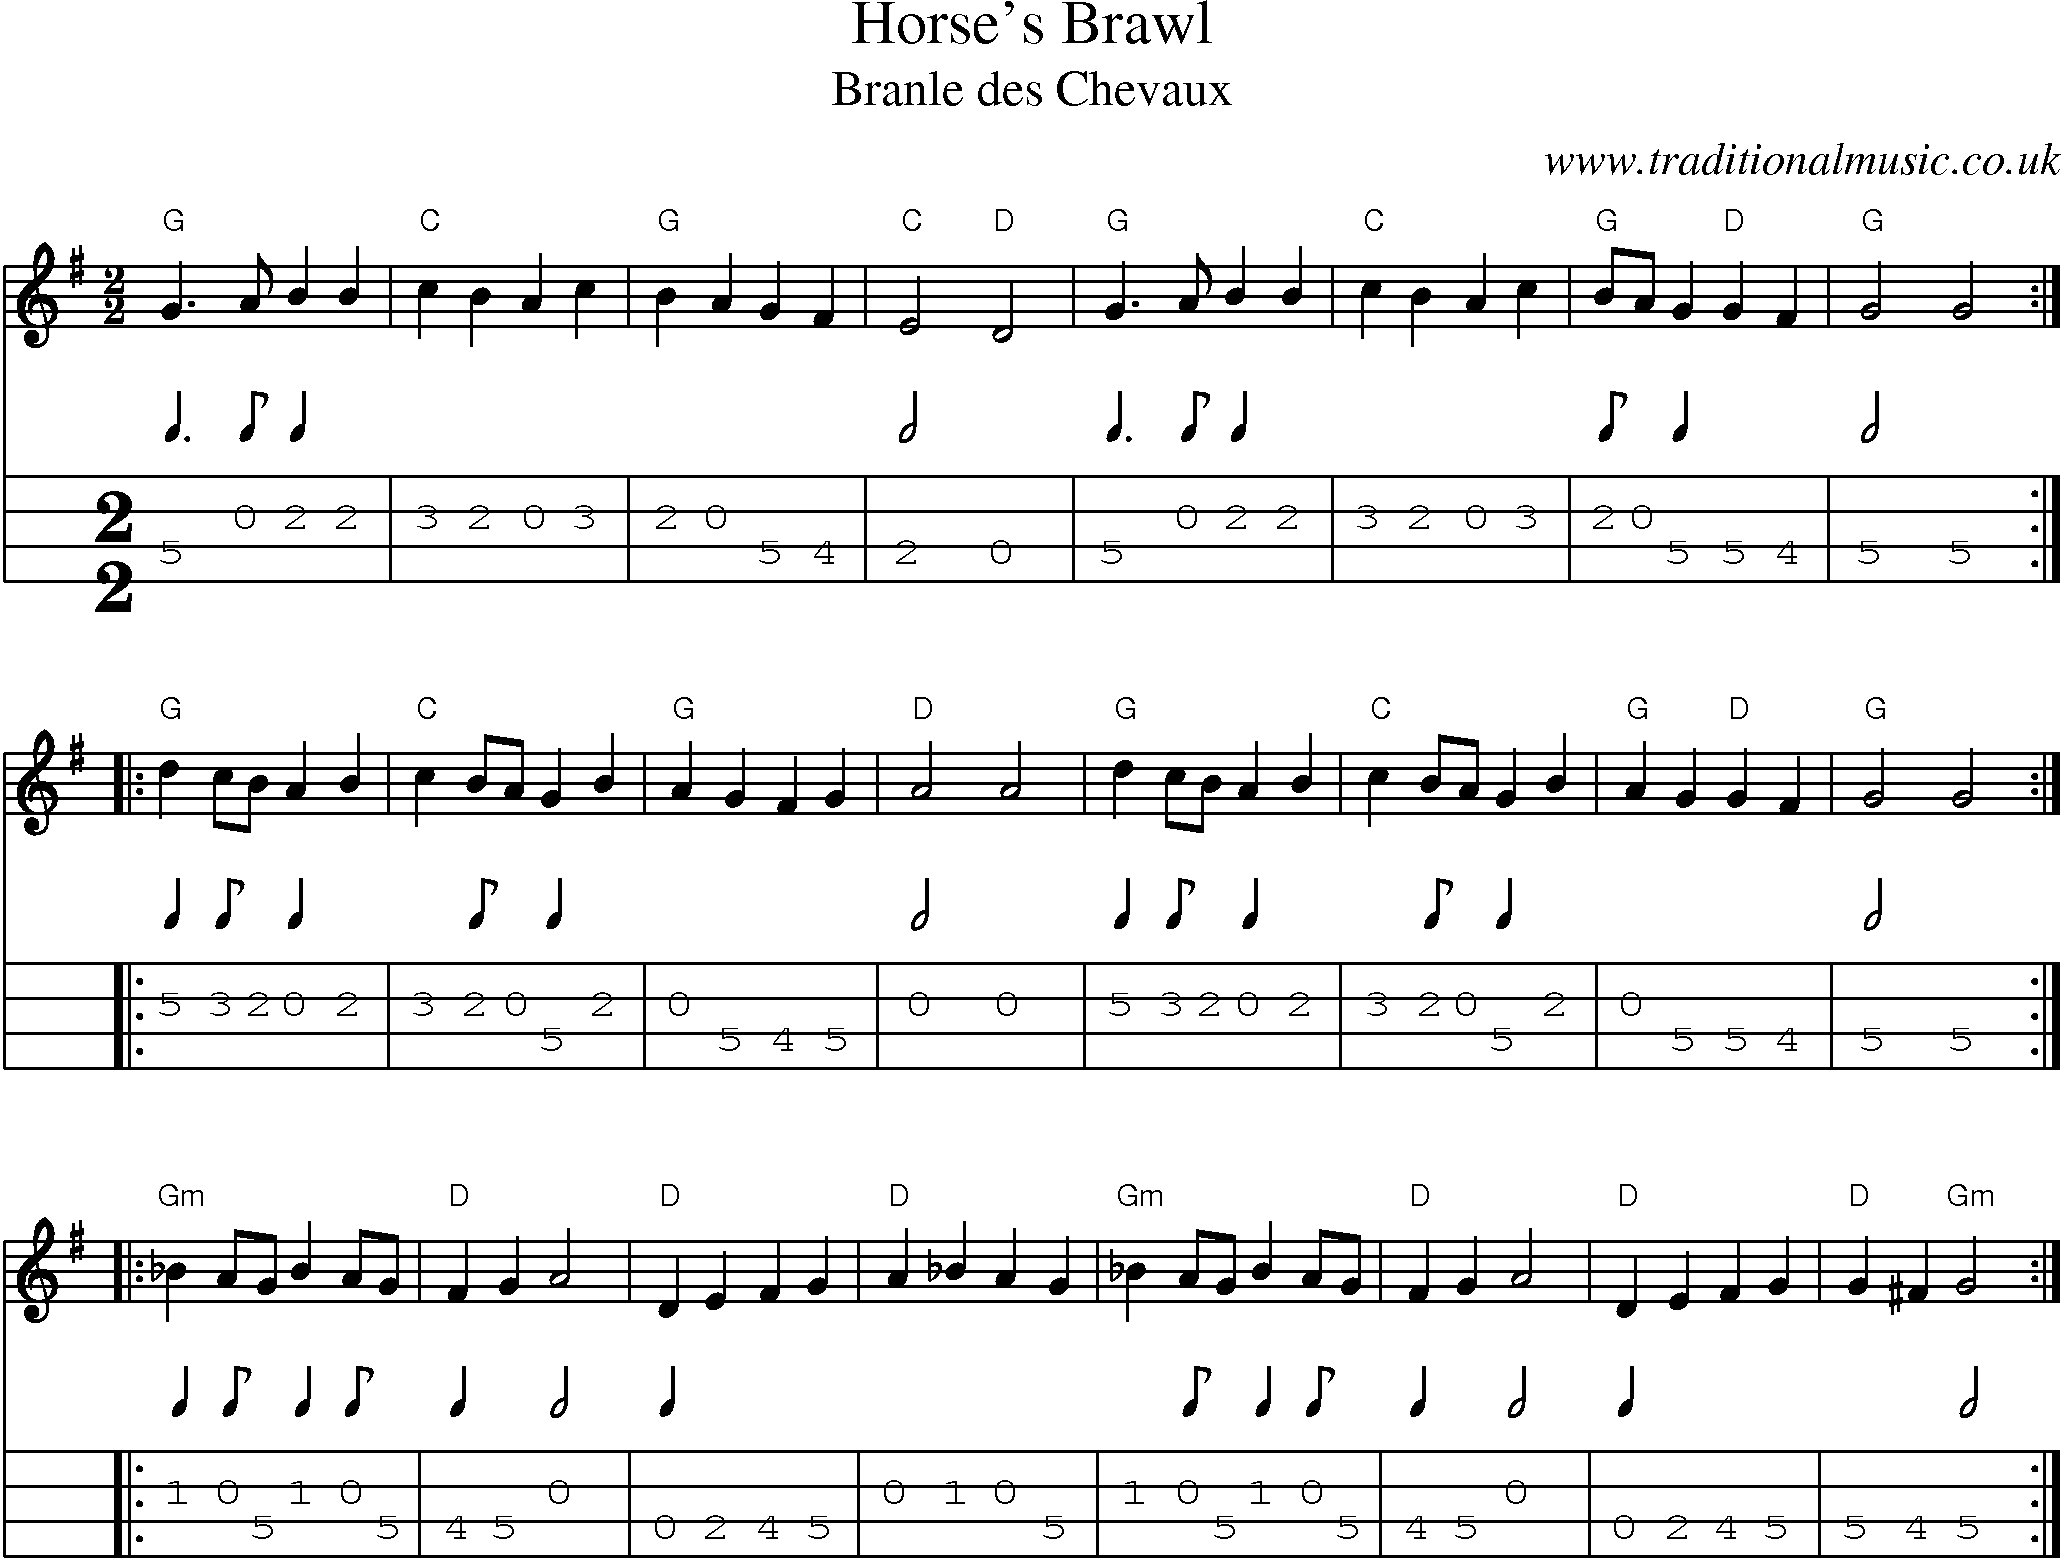 Music Score and Guitar Tabs for Horses Brawl